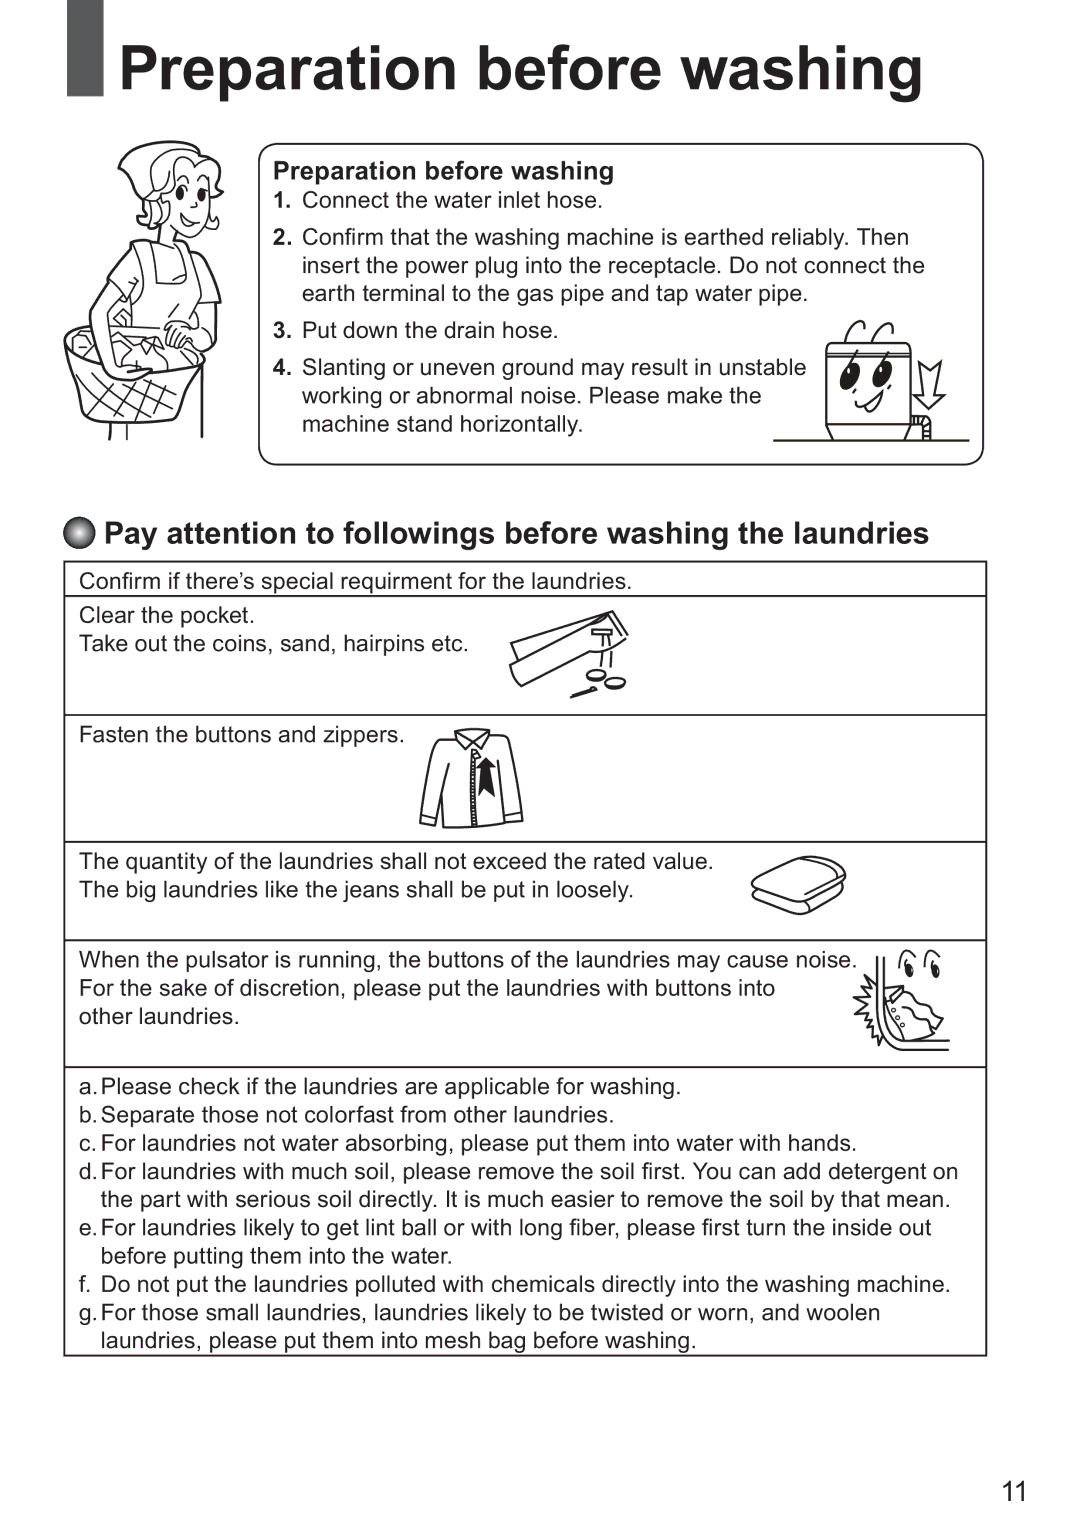 Haier HWM80-928NZP user manual Preparation before washing, Pay attention to followings before washing the laundries 